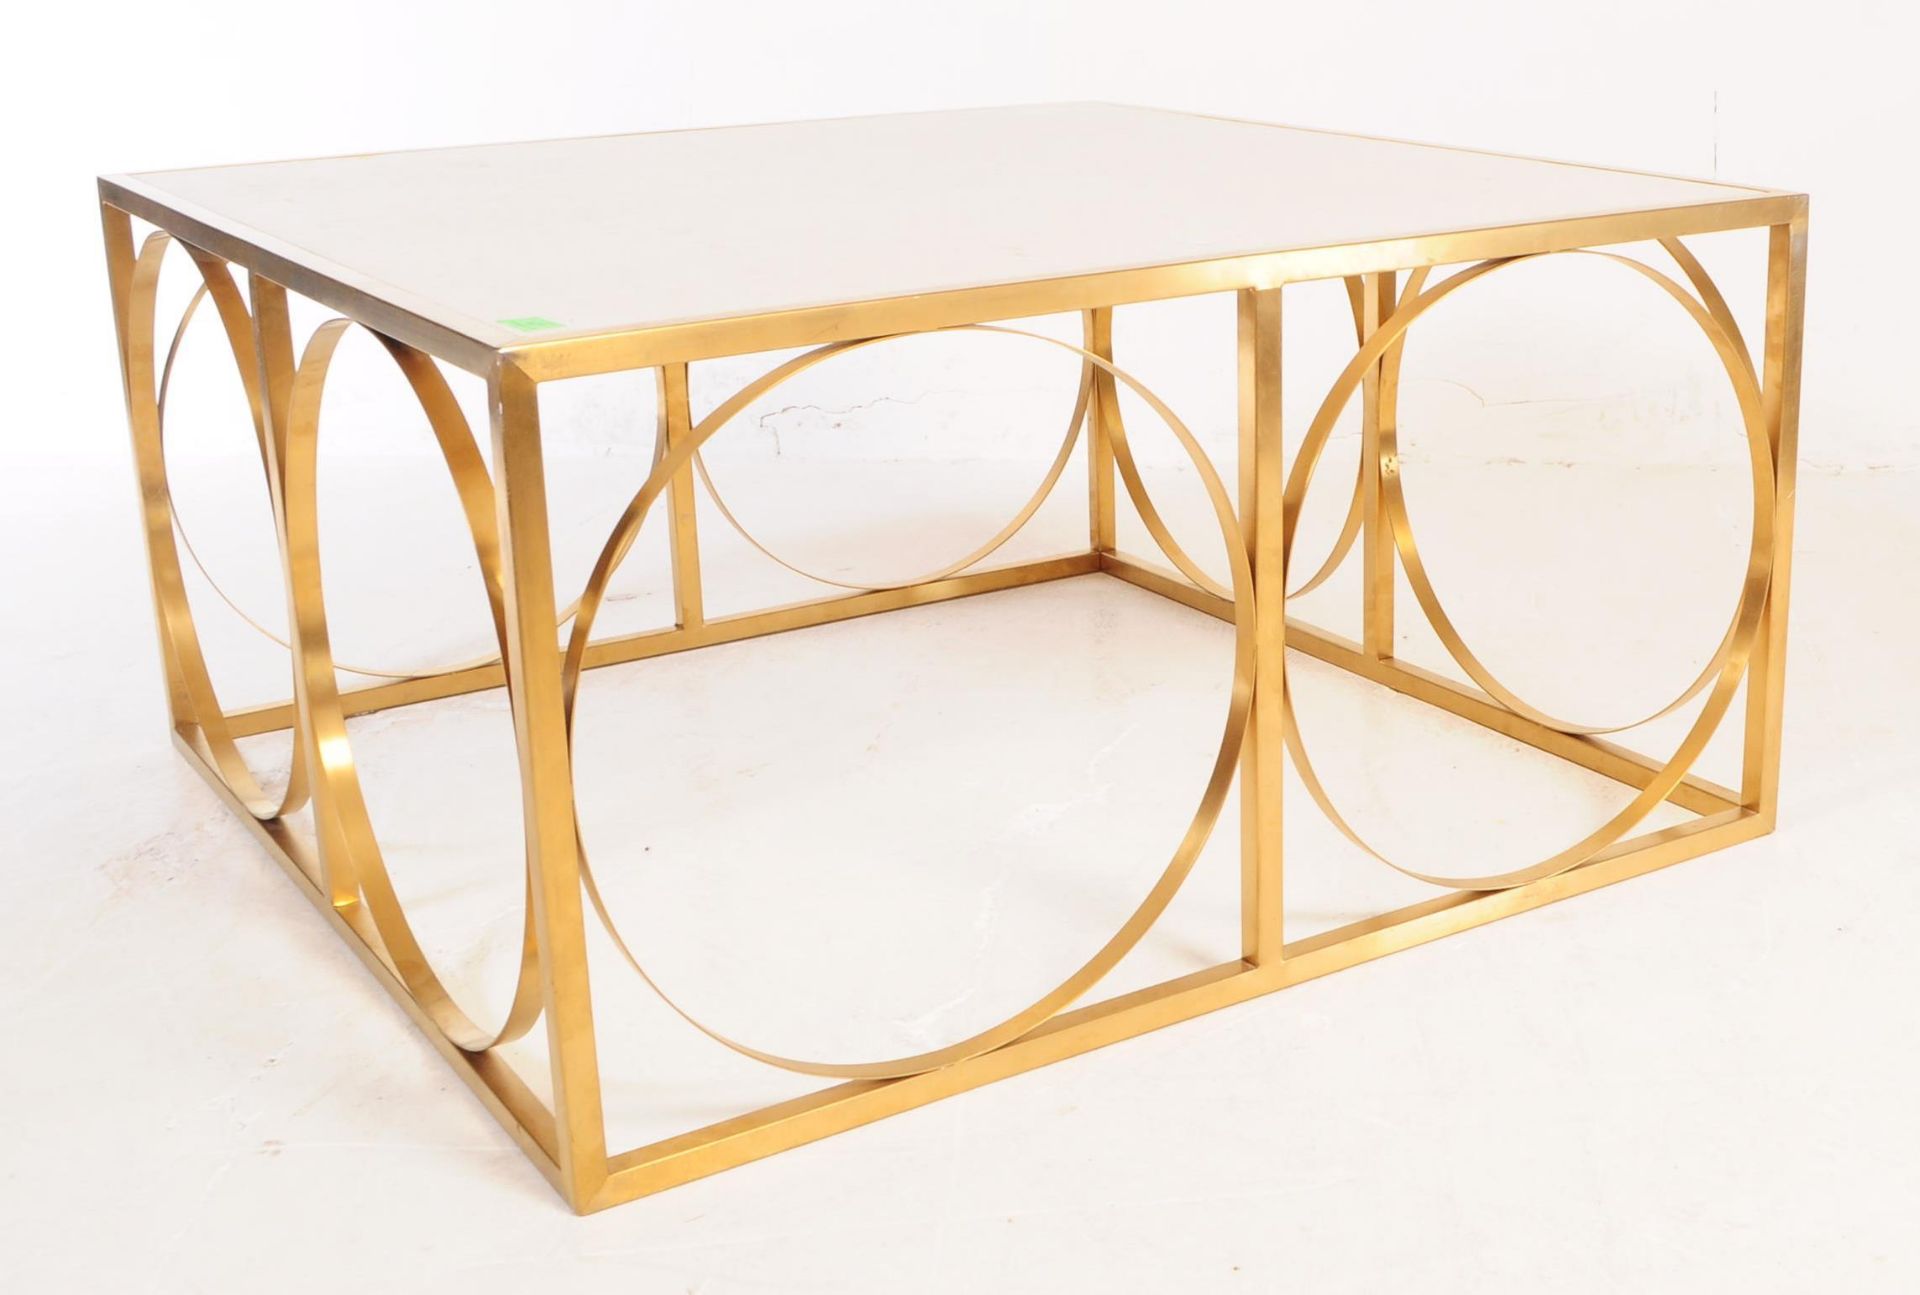 CONTEMPORARY STAINLESS STEEL AND RESIN LOW COFFEE TABLE - Image 3 of 5